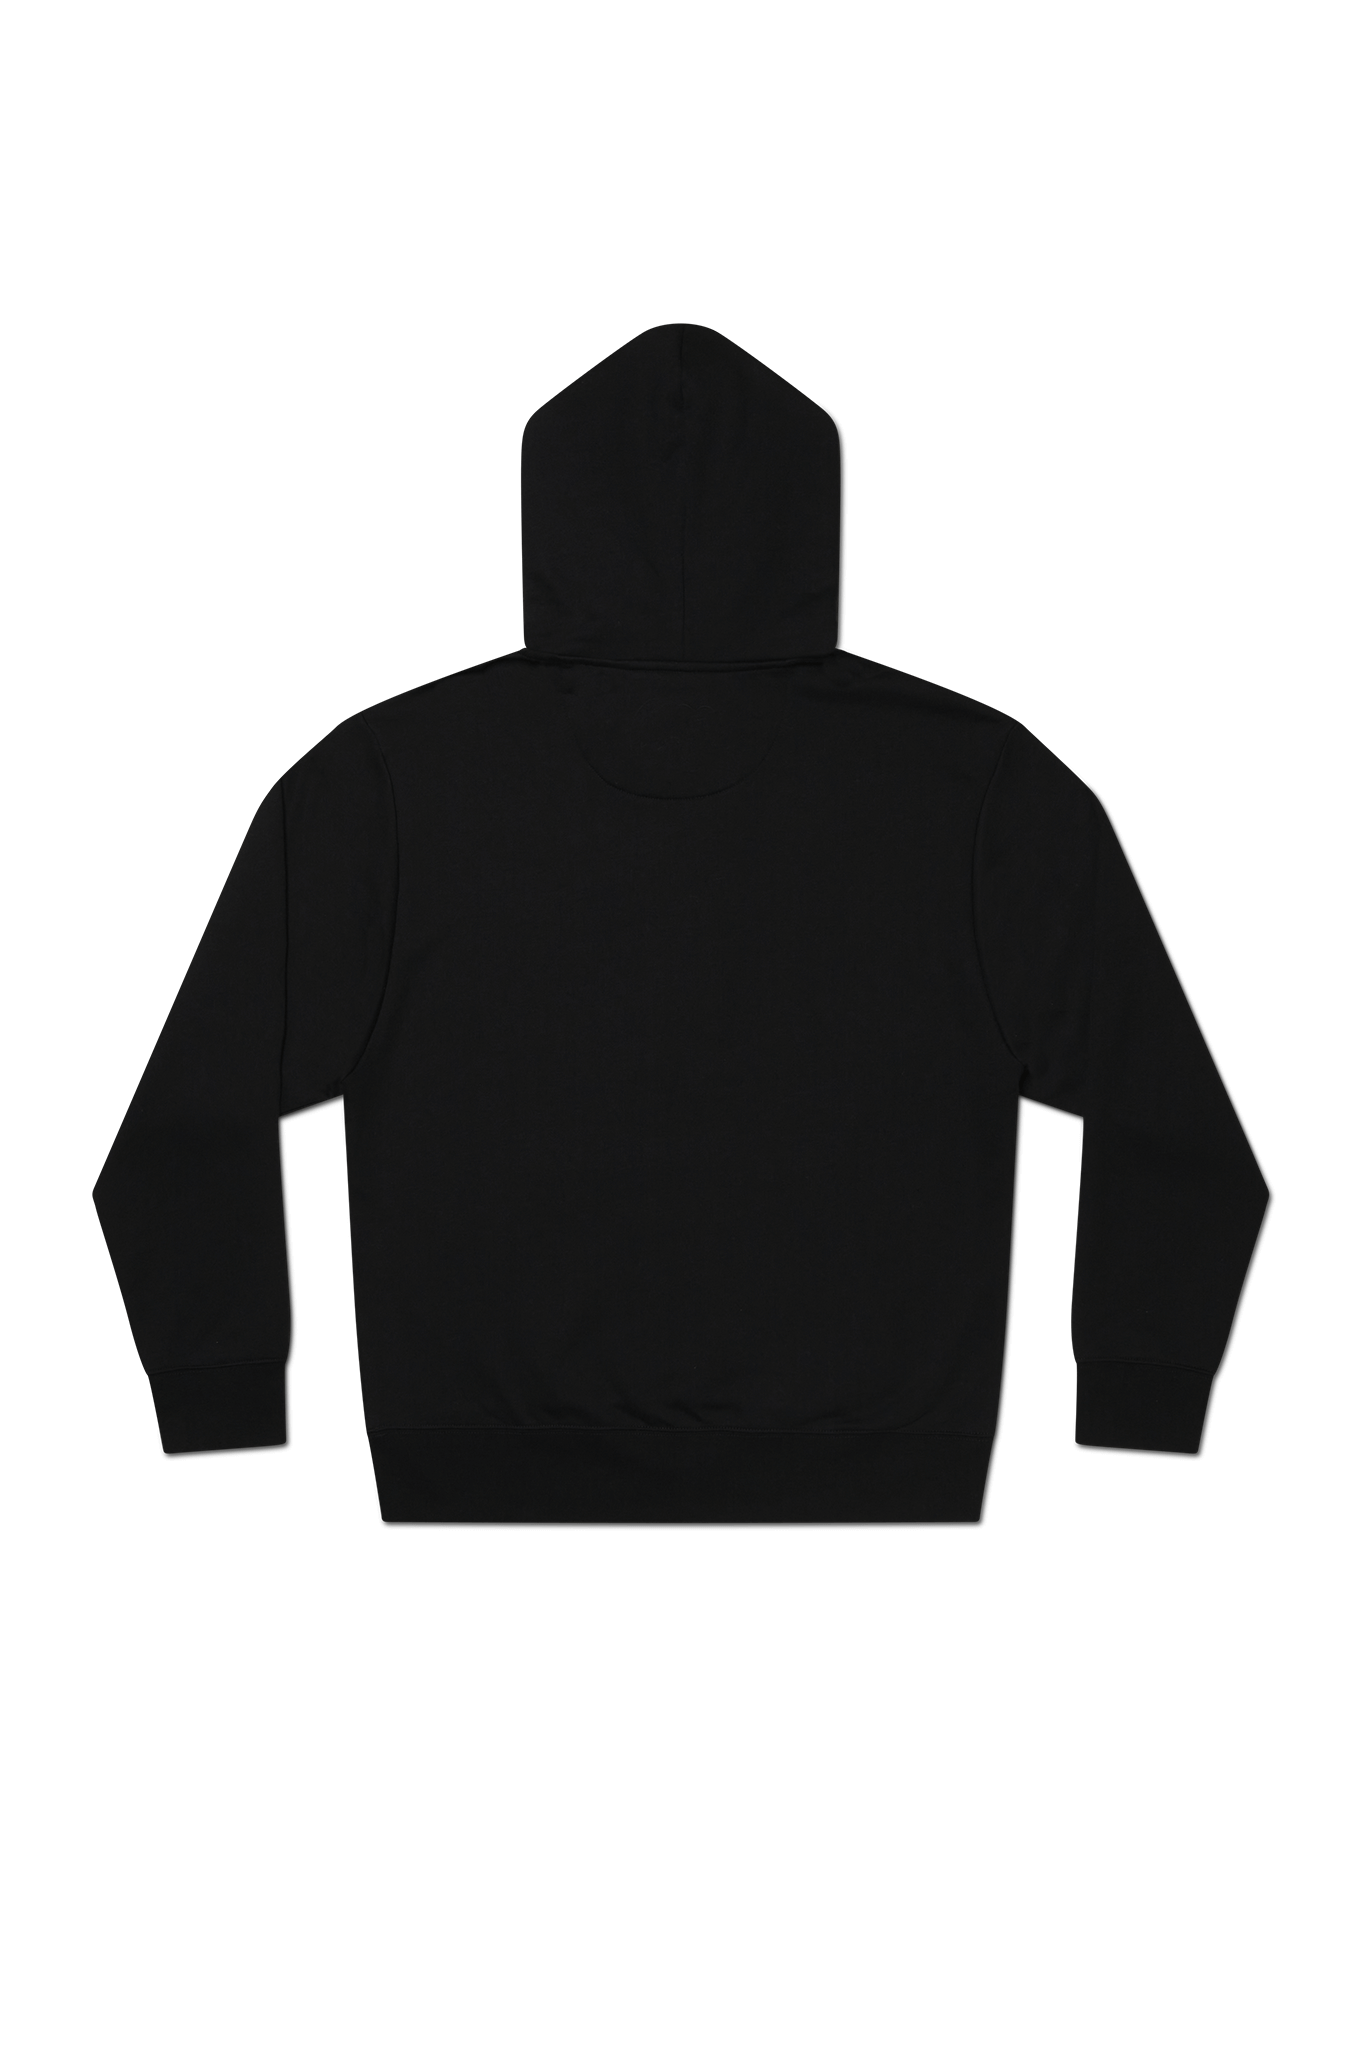 Eastside NBA - Playing Golf After This All Star Oversized Hoodie Black